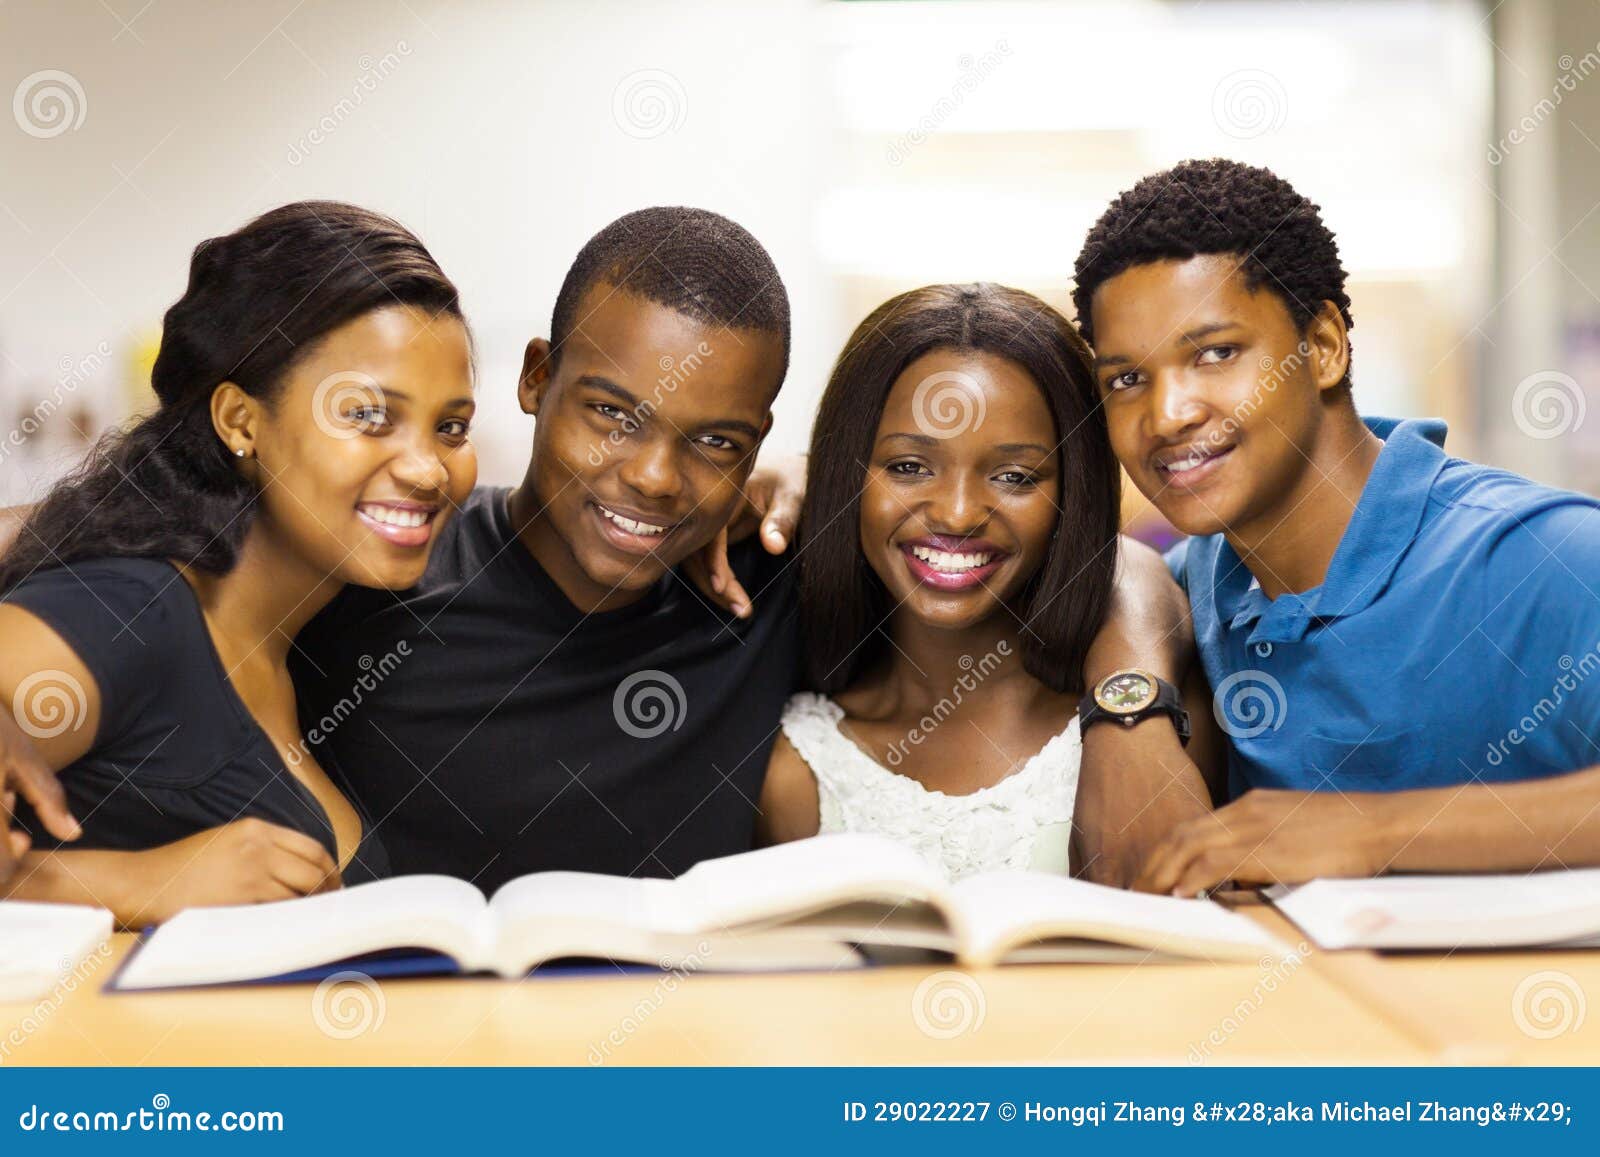 African American College Students Stock Image - Image: 29022227